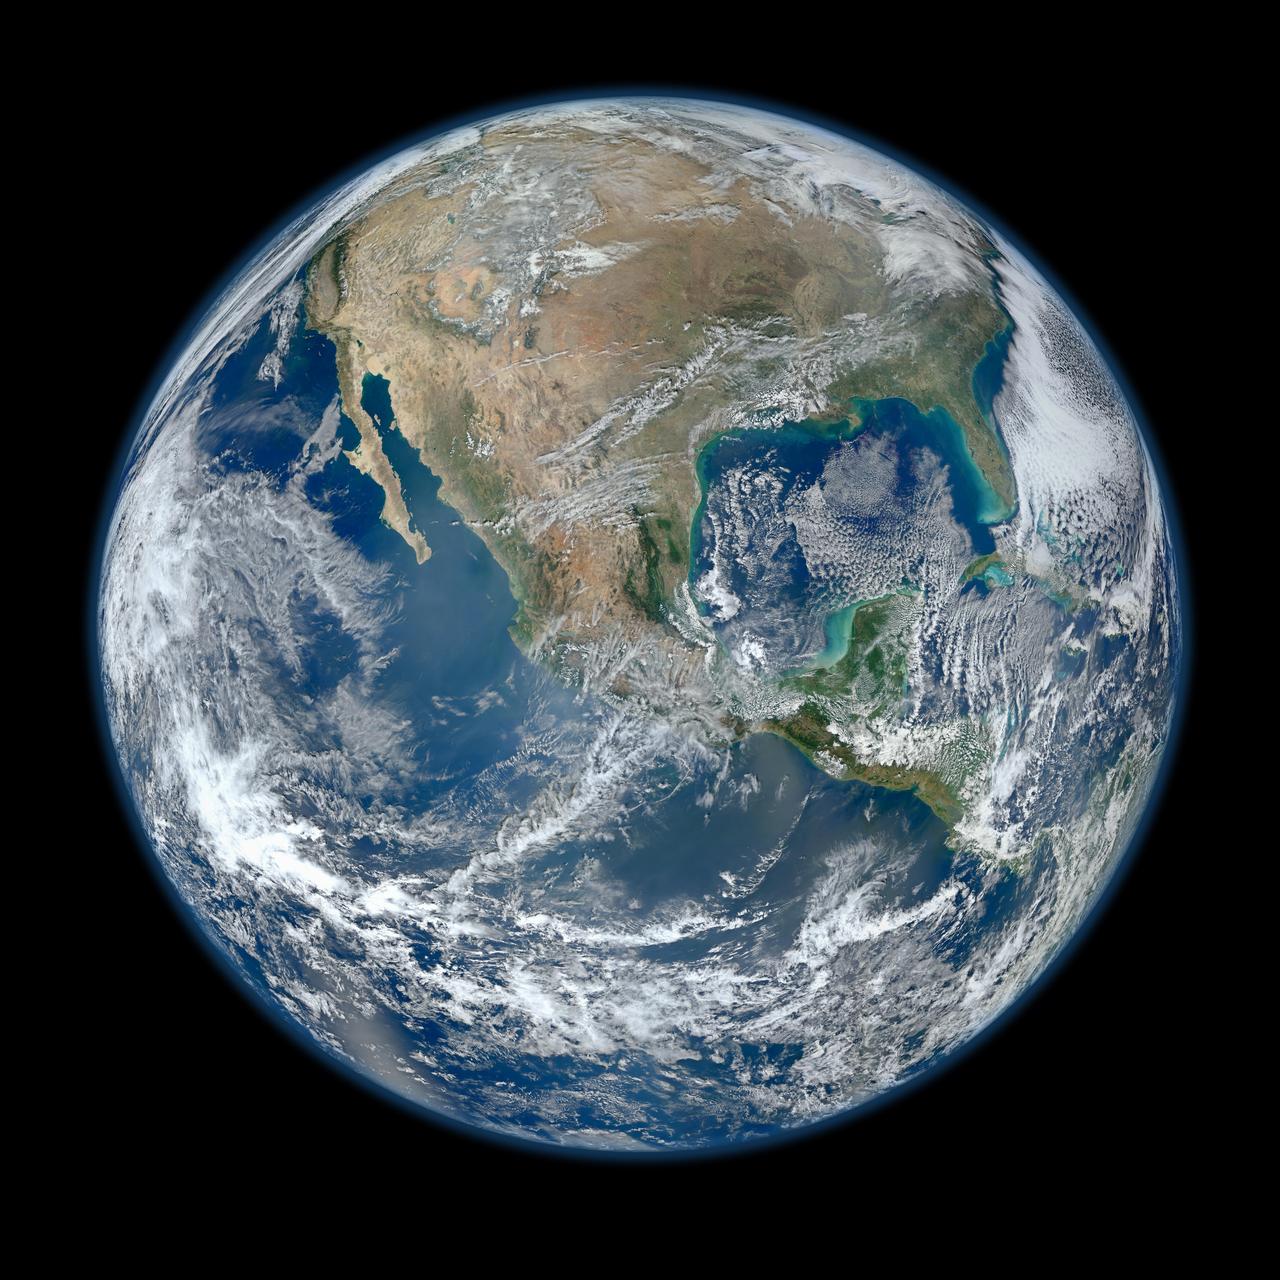 North America is visible in this image of Earth. Clouds swirl all over the globe, and much of Earth's water is visible.